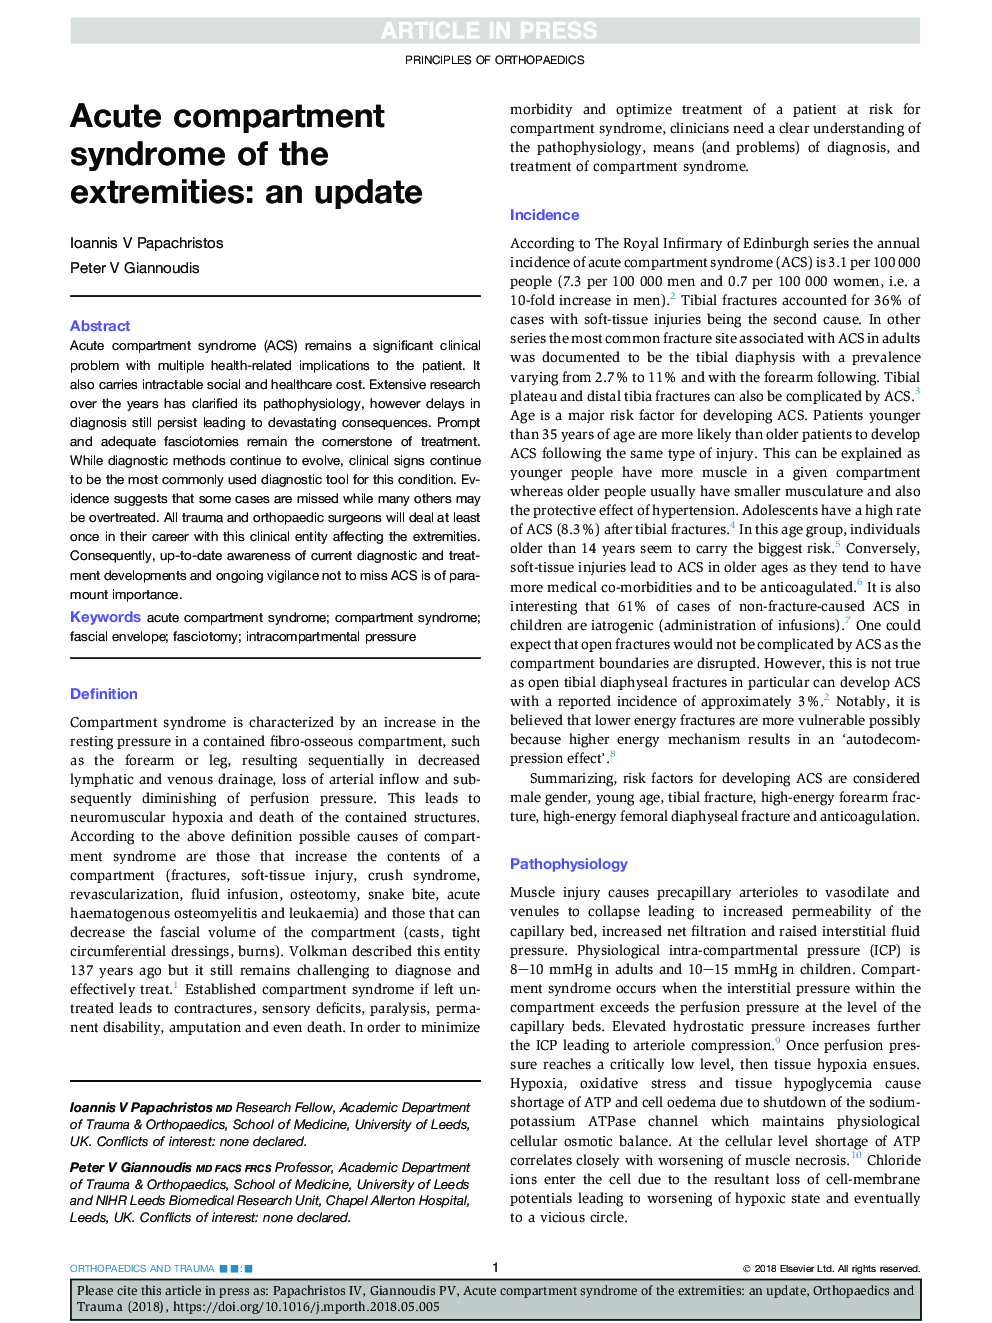 Acute compartment syndrome of the extremities: an update